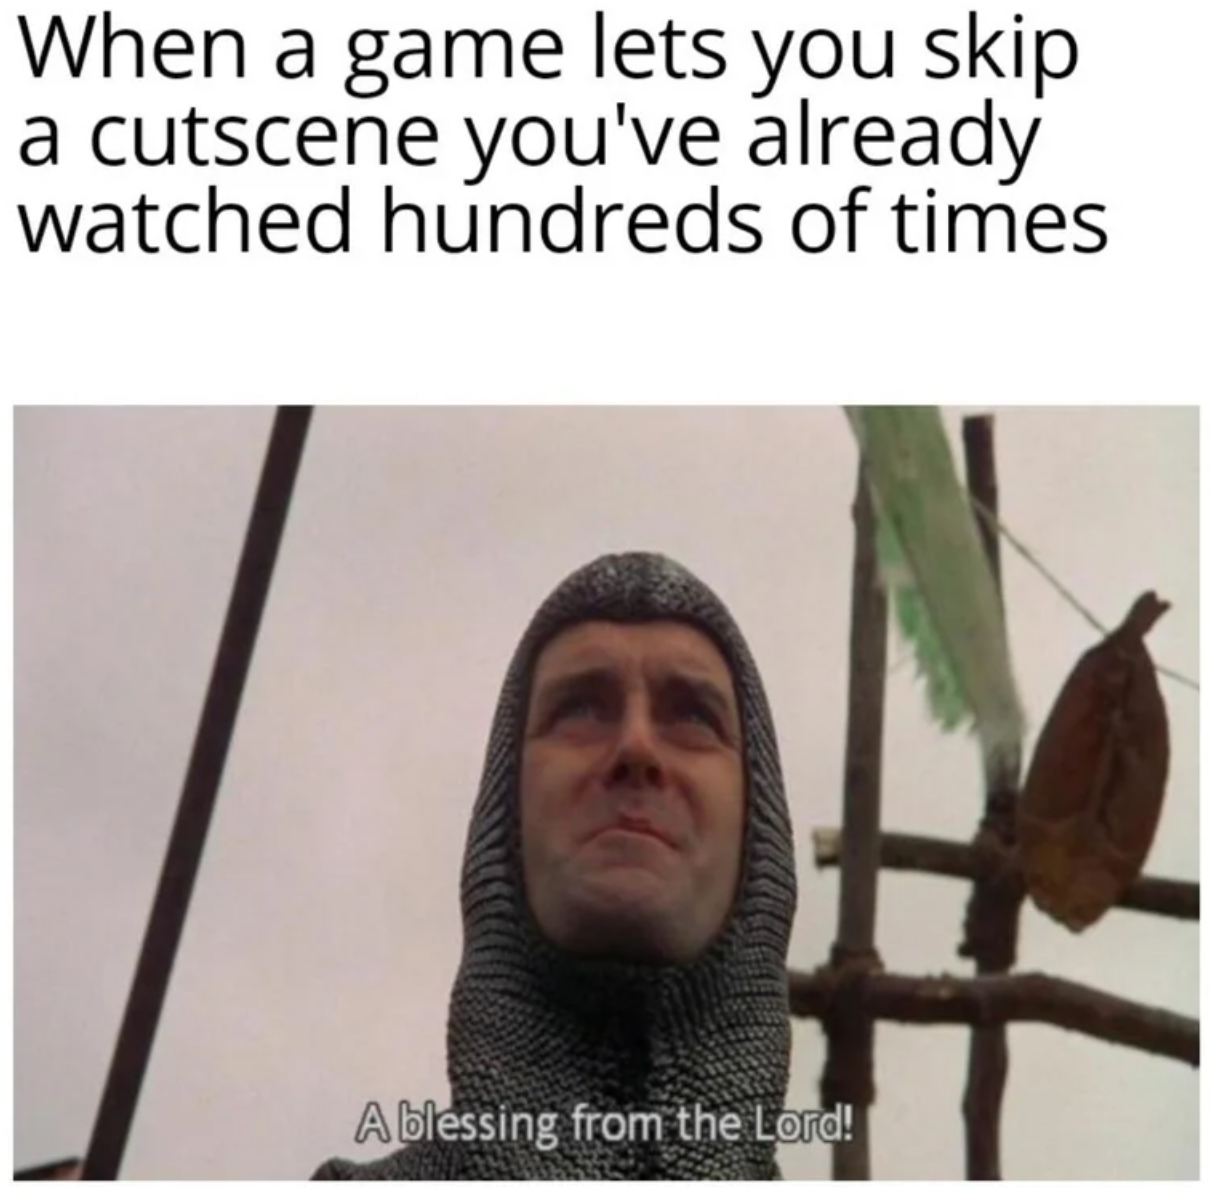 funny gaming memes - apple is trash meme - When a game lets you skip a cutscene you've already watched hundreds of times Ablessing from the Lord!